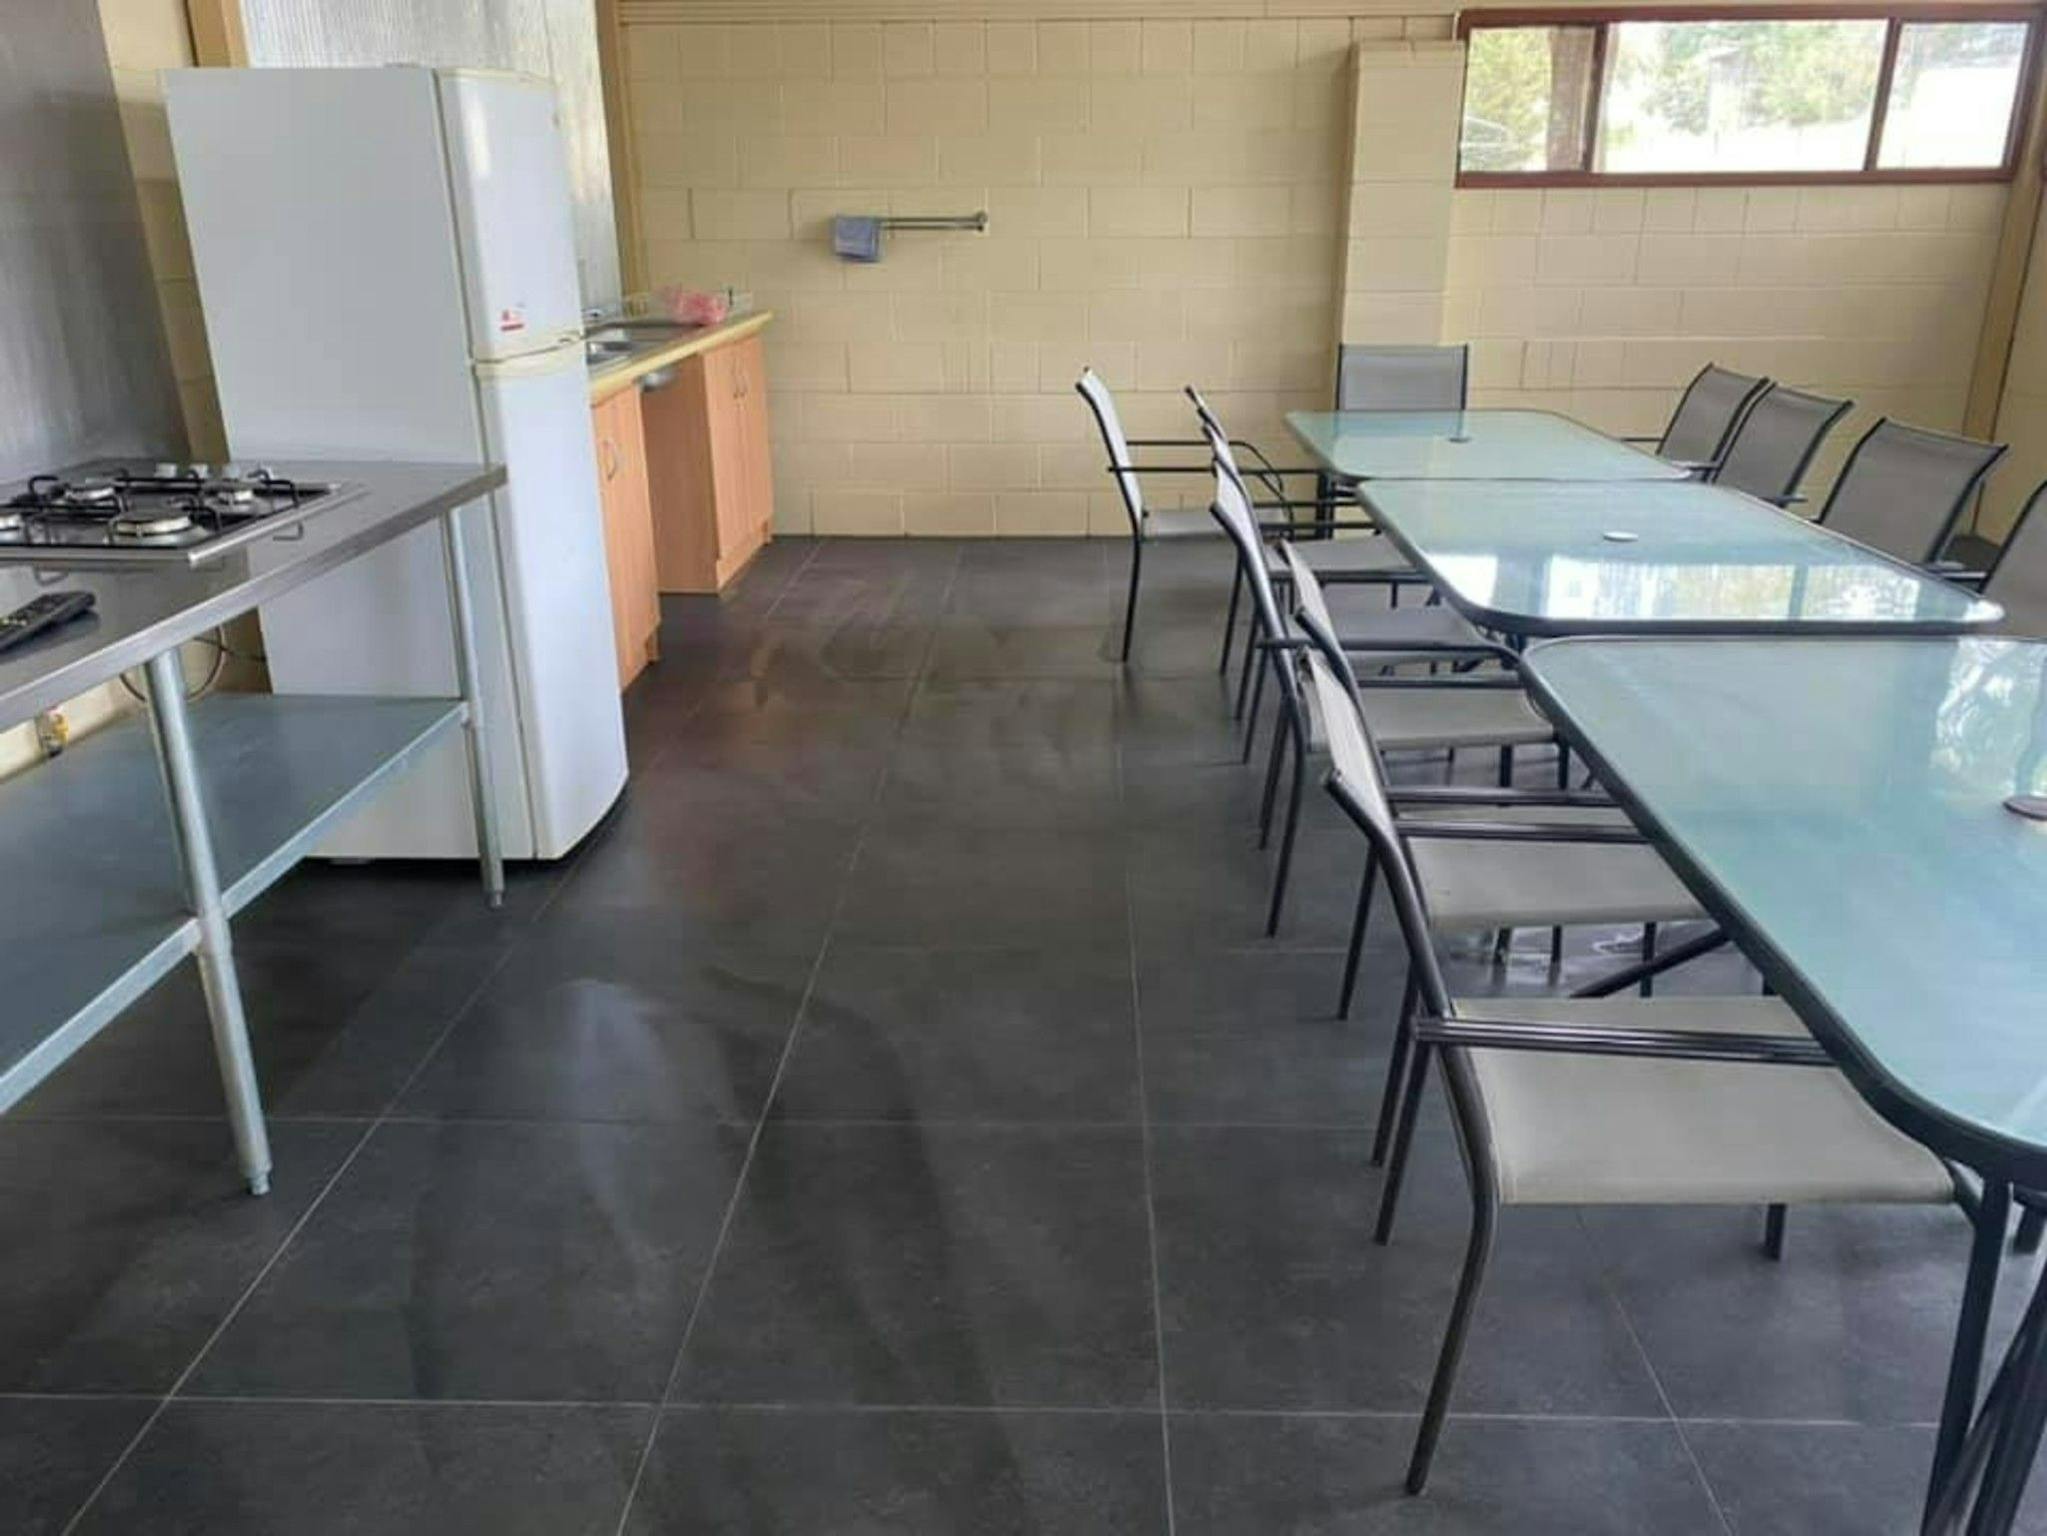 There are great facilities with a central camp kitchen